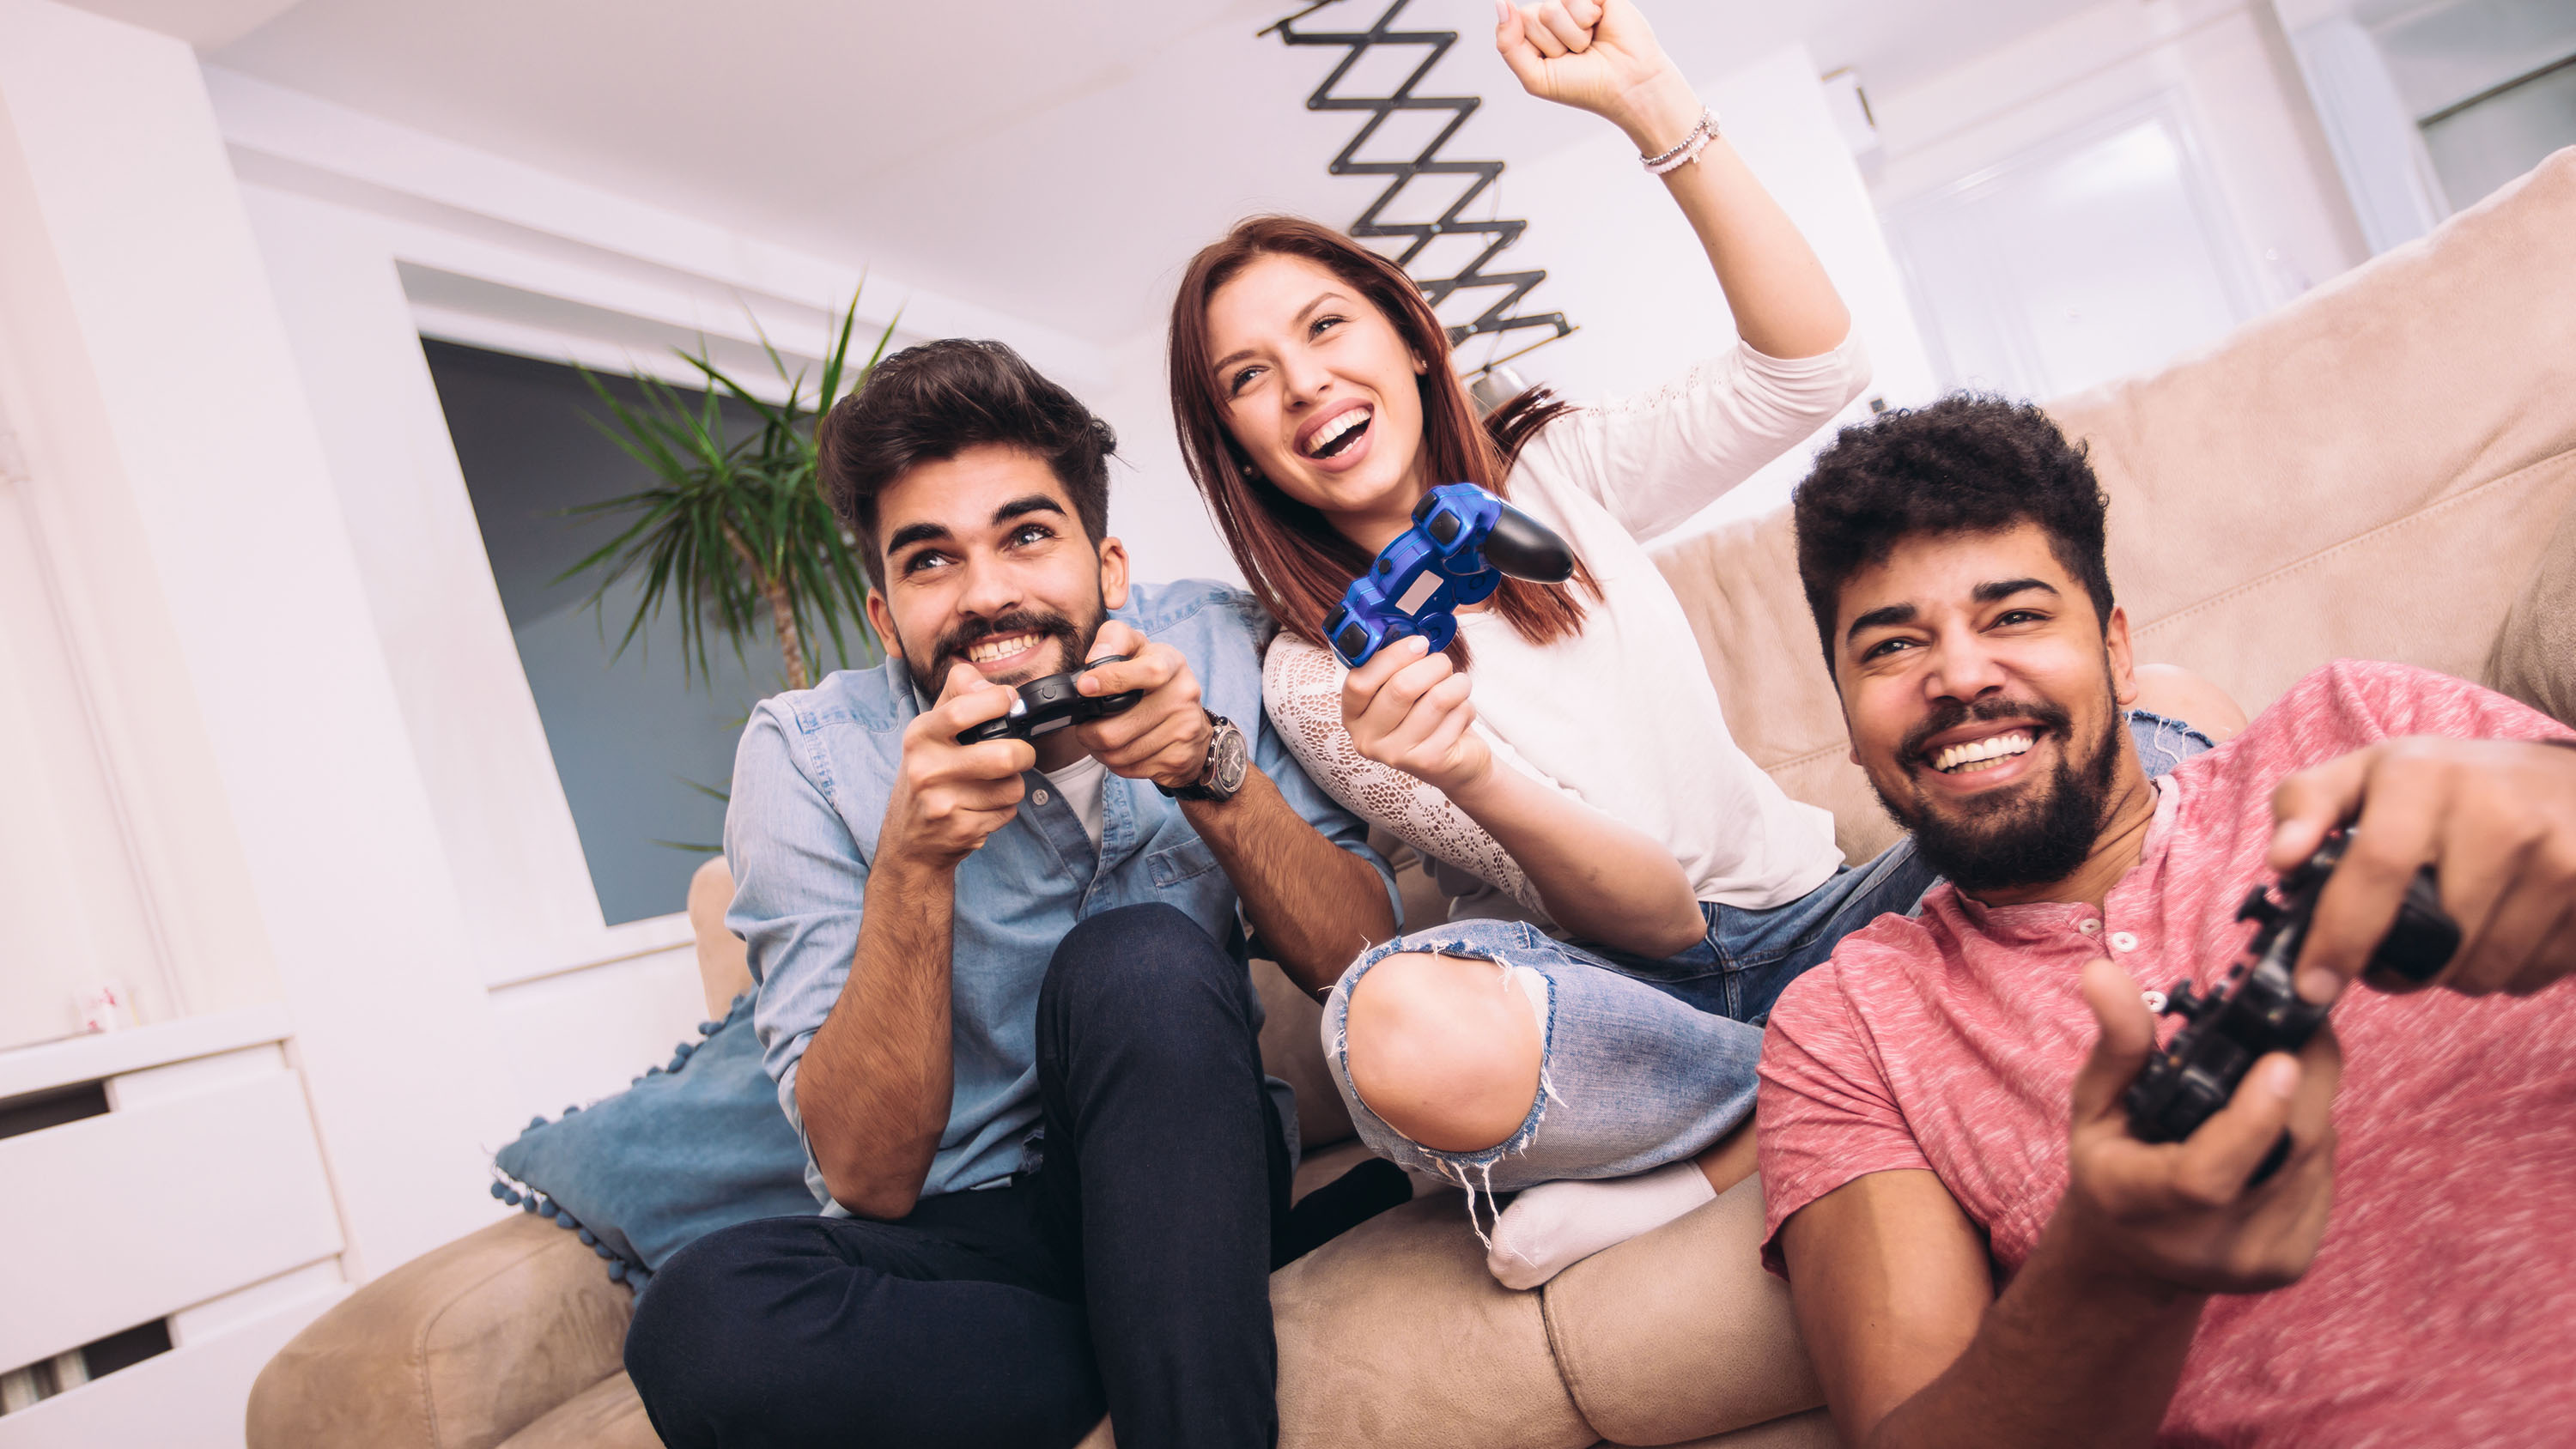 Group of friends play video games together having fun at home